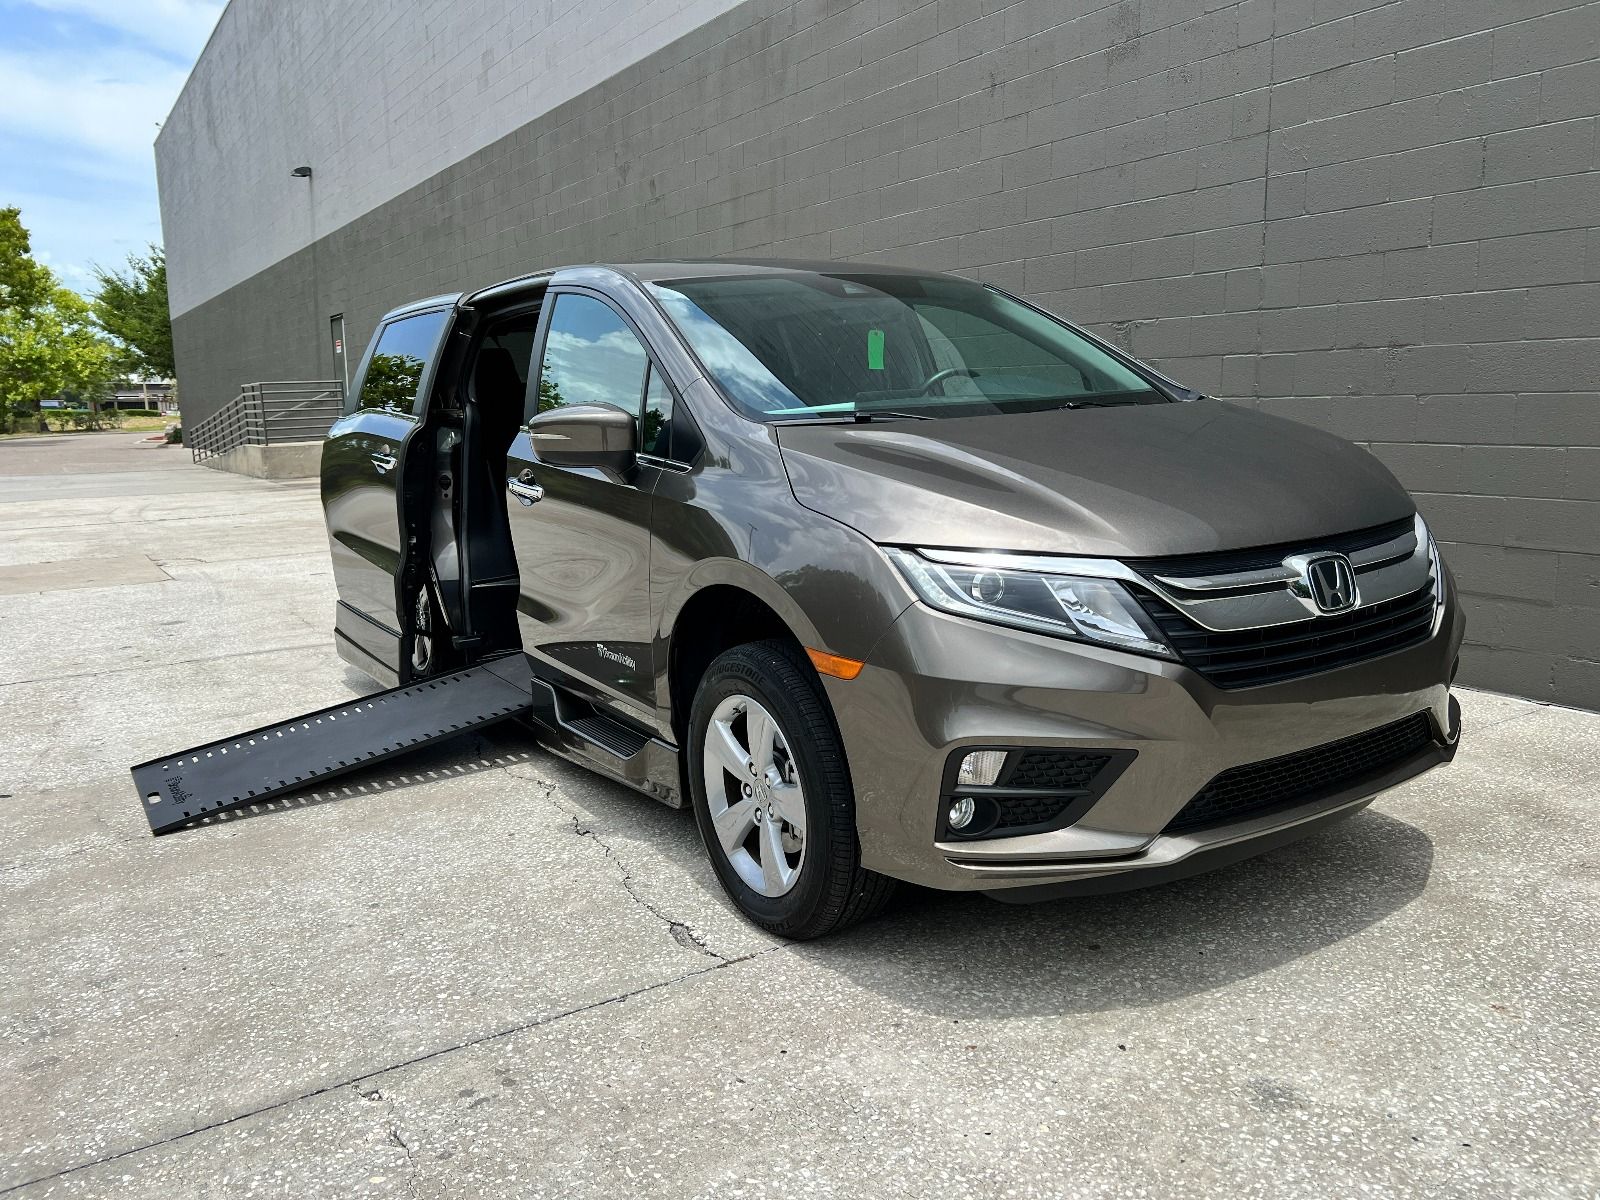 Gray 2019 Honda Odyssey Wheelchair Van with ramp deployed, as seen from passenger side front angle.